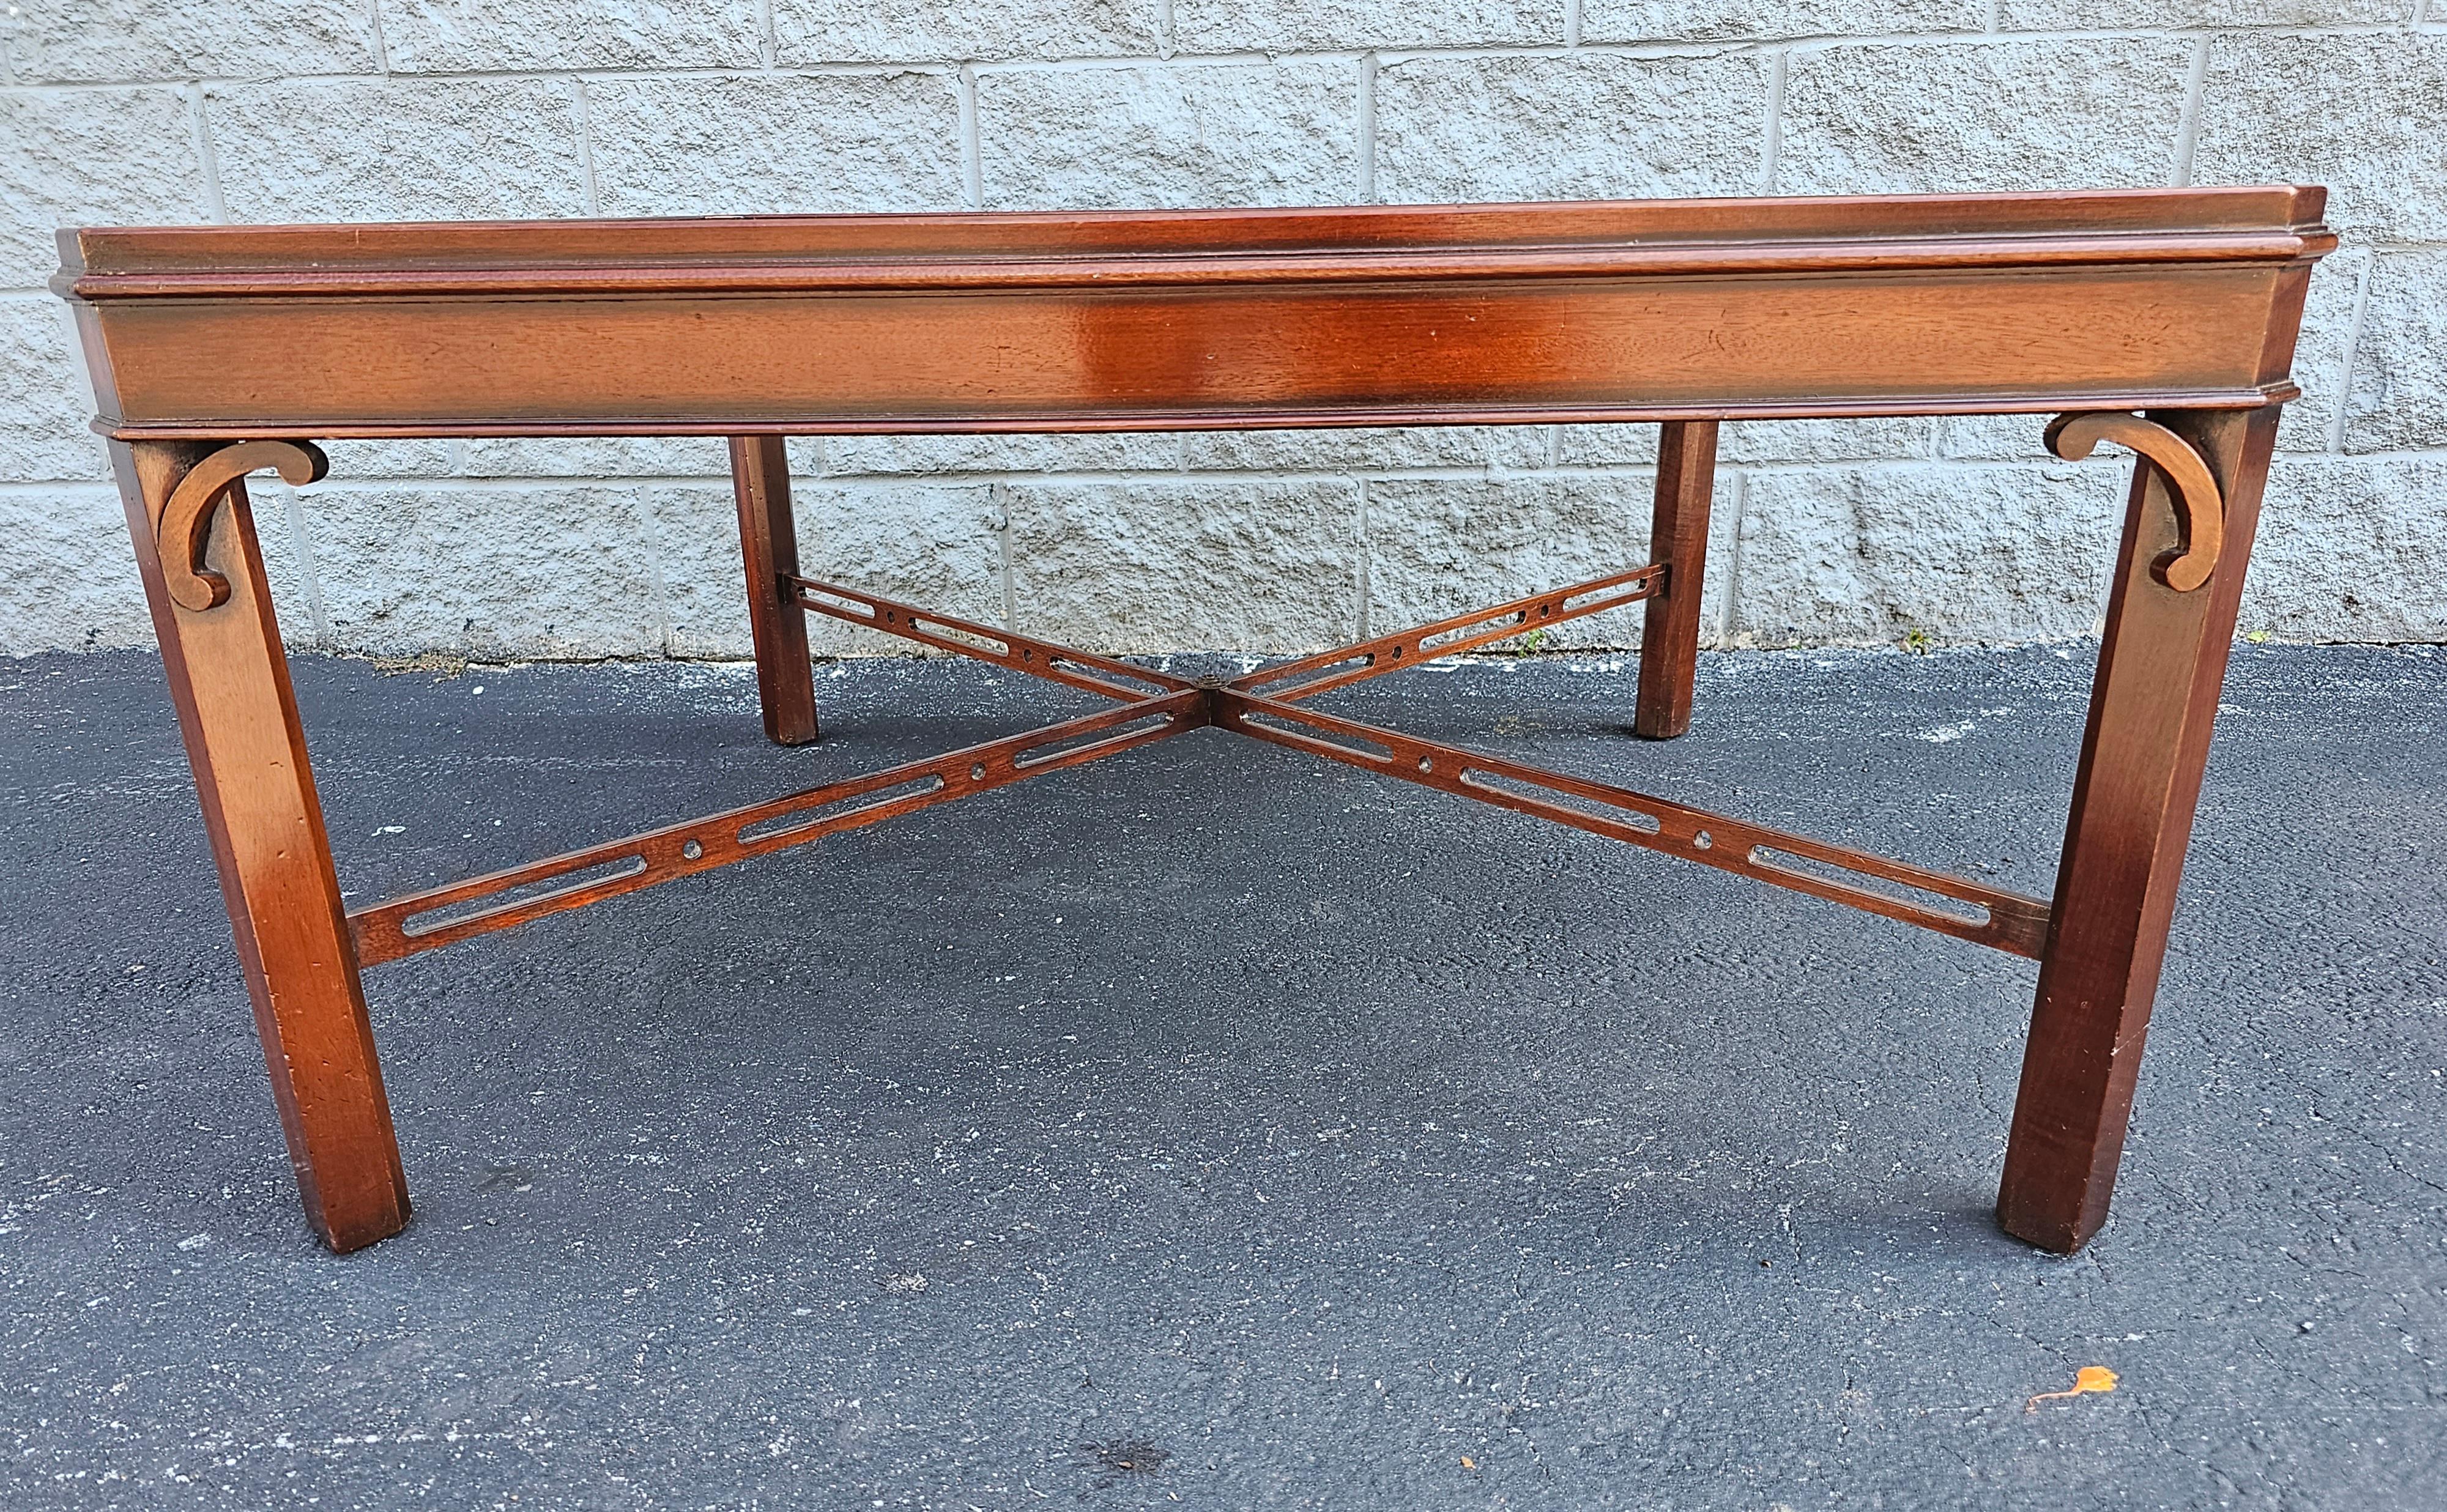 20th Century George III Style Mahogany Square Coffee Table In Good Condition For Sale In Germantown, MD